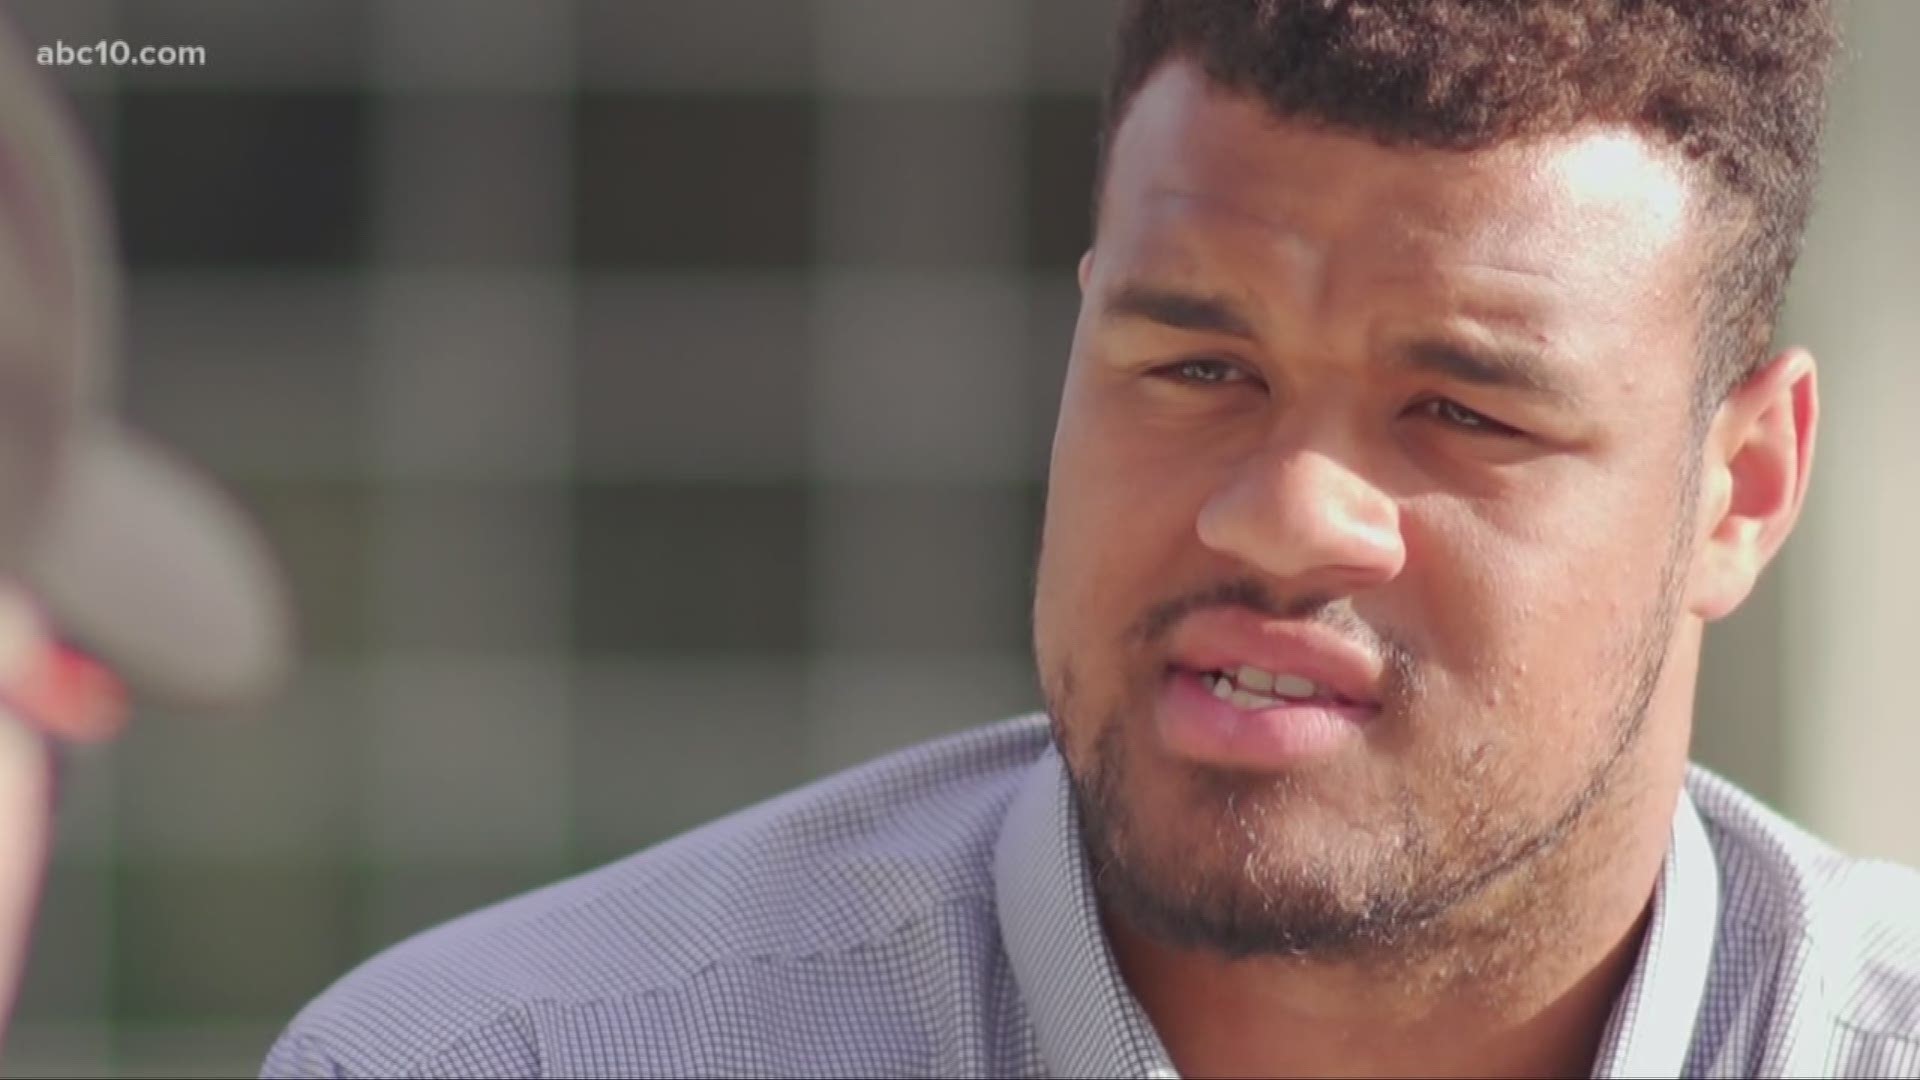 Arik Armstead is a menacing defensive lineman for the San Francisco 49ers. But because of his numerous charitable efforts here in his hometown of Sacramento, he's known as the football player with the big smile and even a bigger heart.